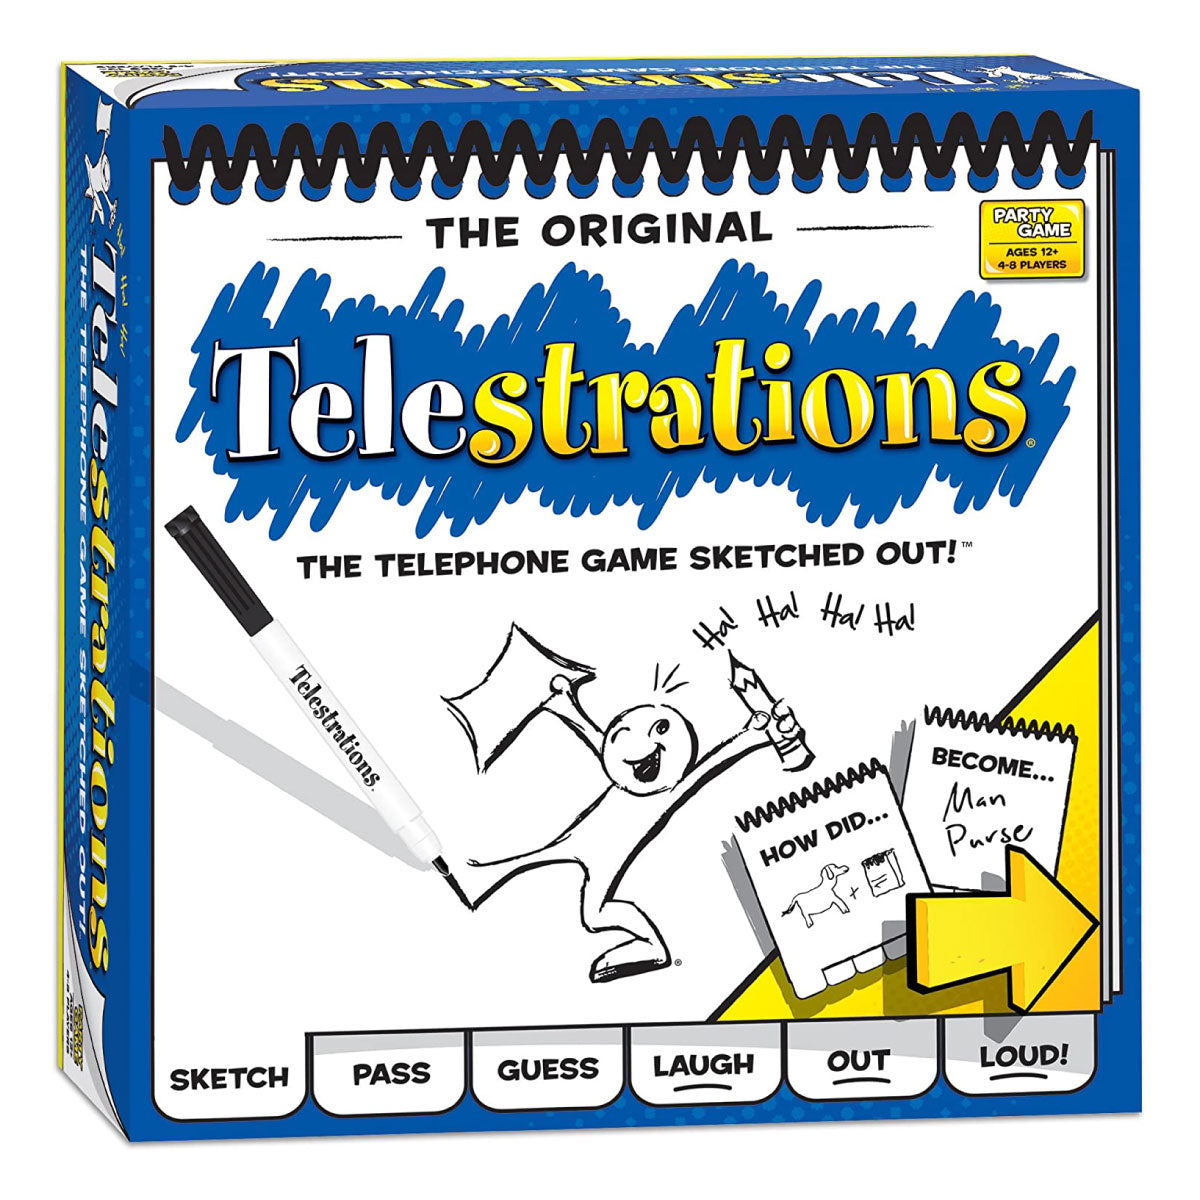 Telestrations Original from USAOpoly